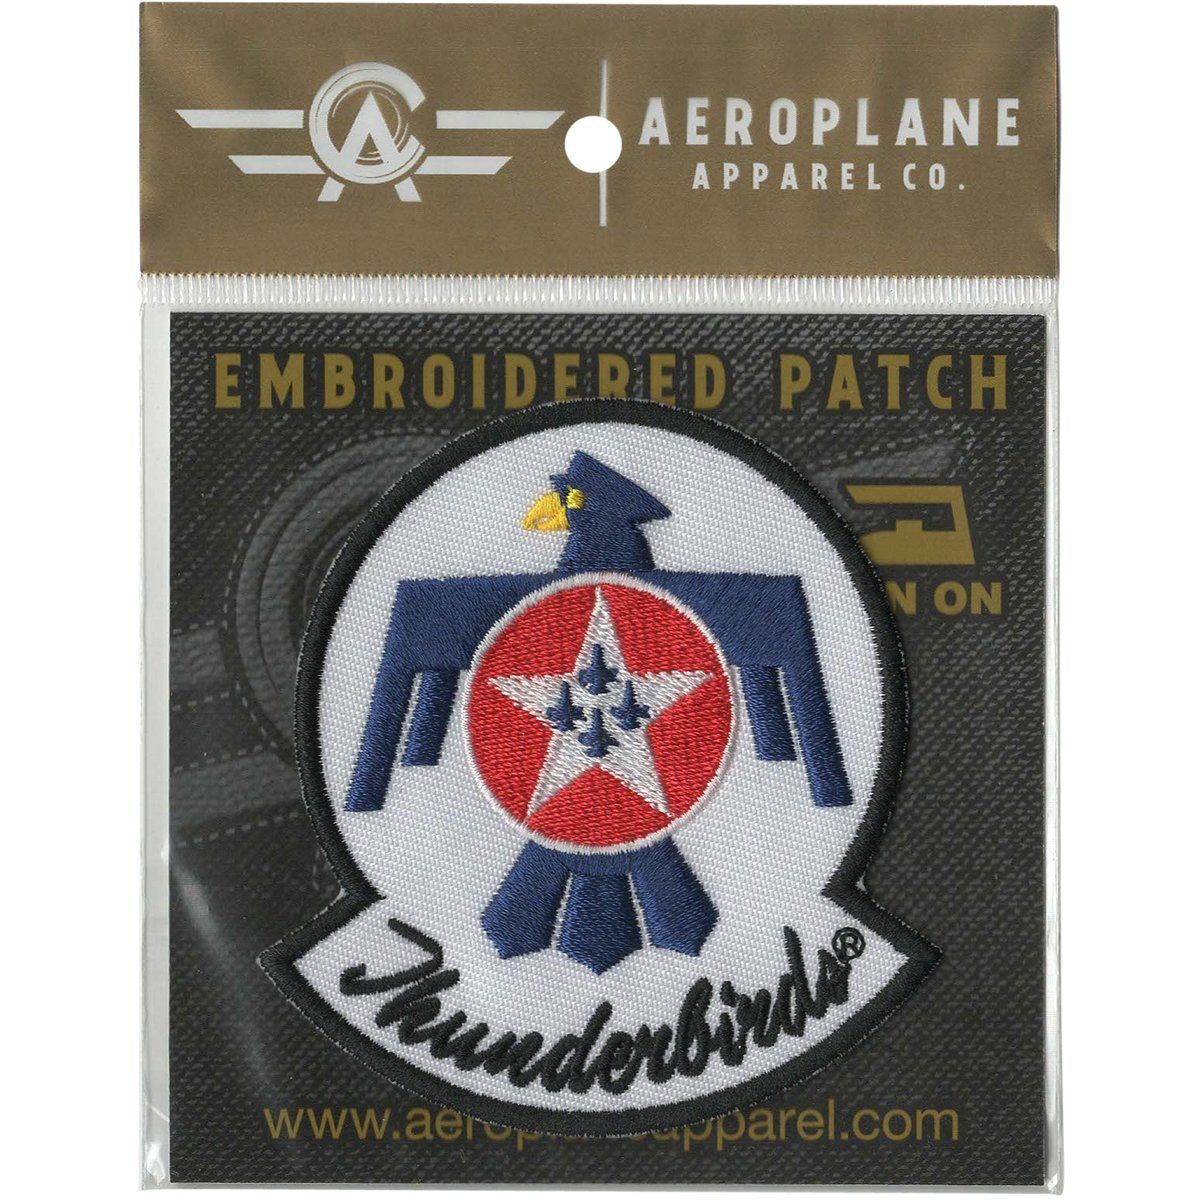 U.S. Air Force Thunderbirds Embroidered Patch (Iron On Application) - PilotMall.com